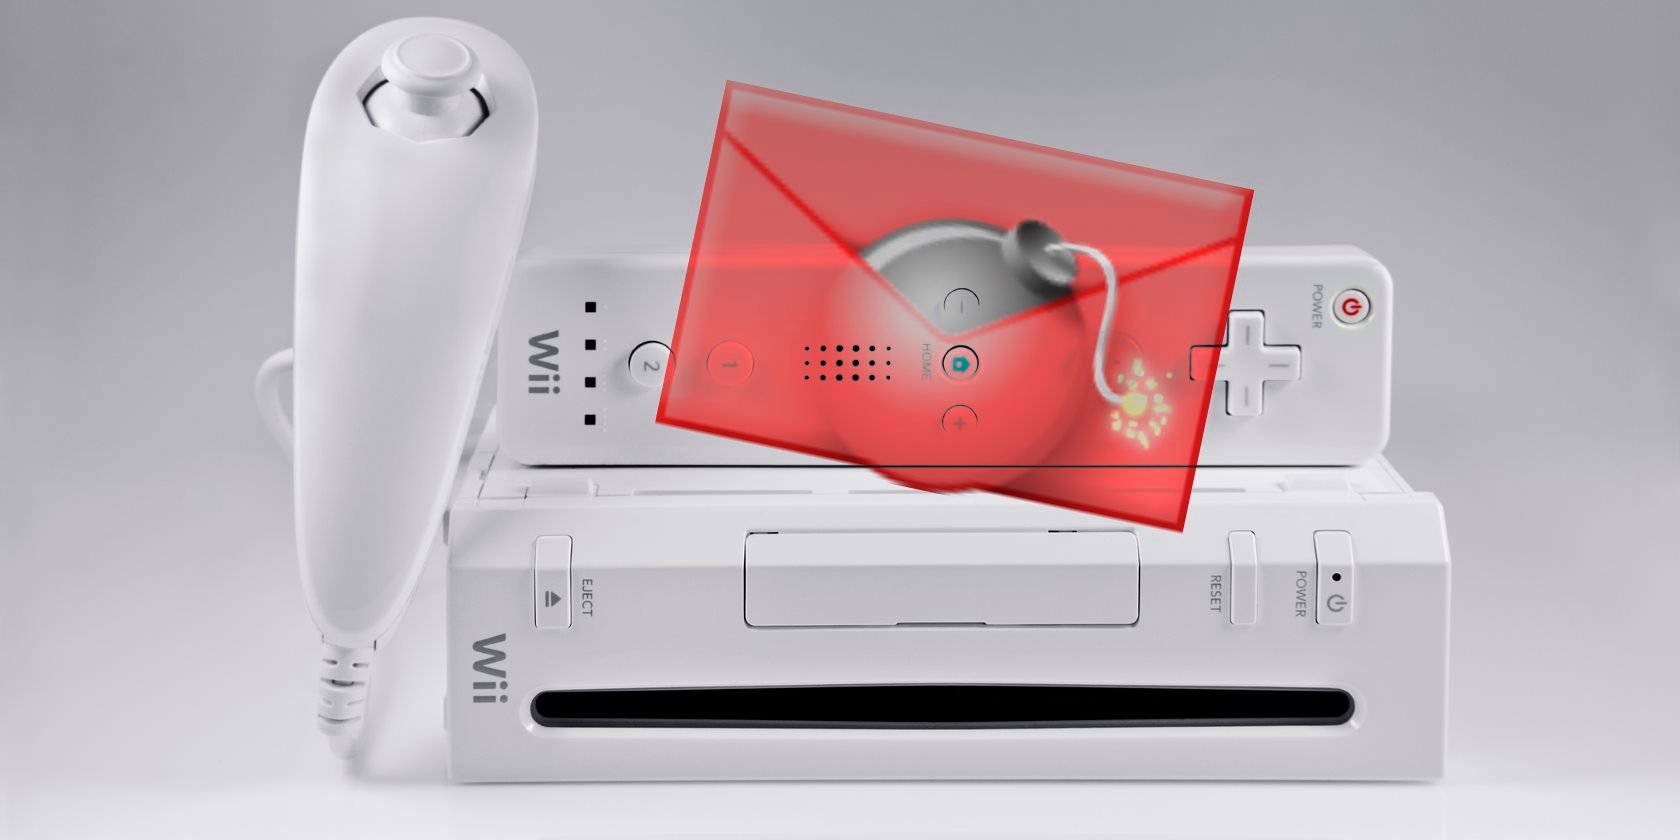 How to Install Homebrew on a Nintendo Wii Using LetterBomb